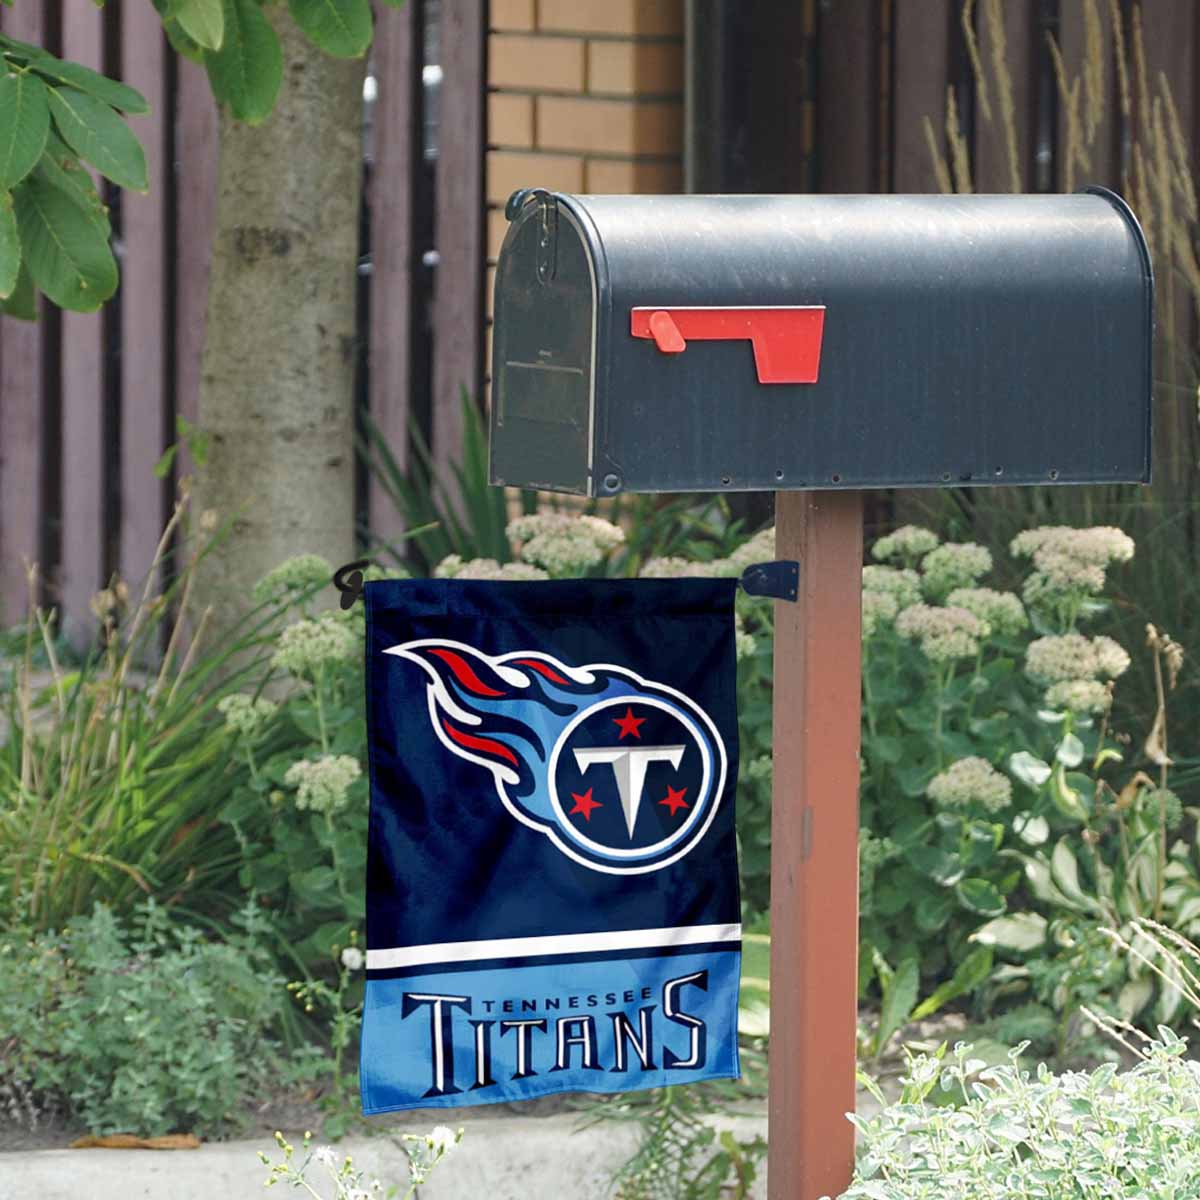 Tennessee Titans Garden Flag and Mailbox Post Pole Mount 194167518512